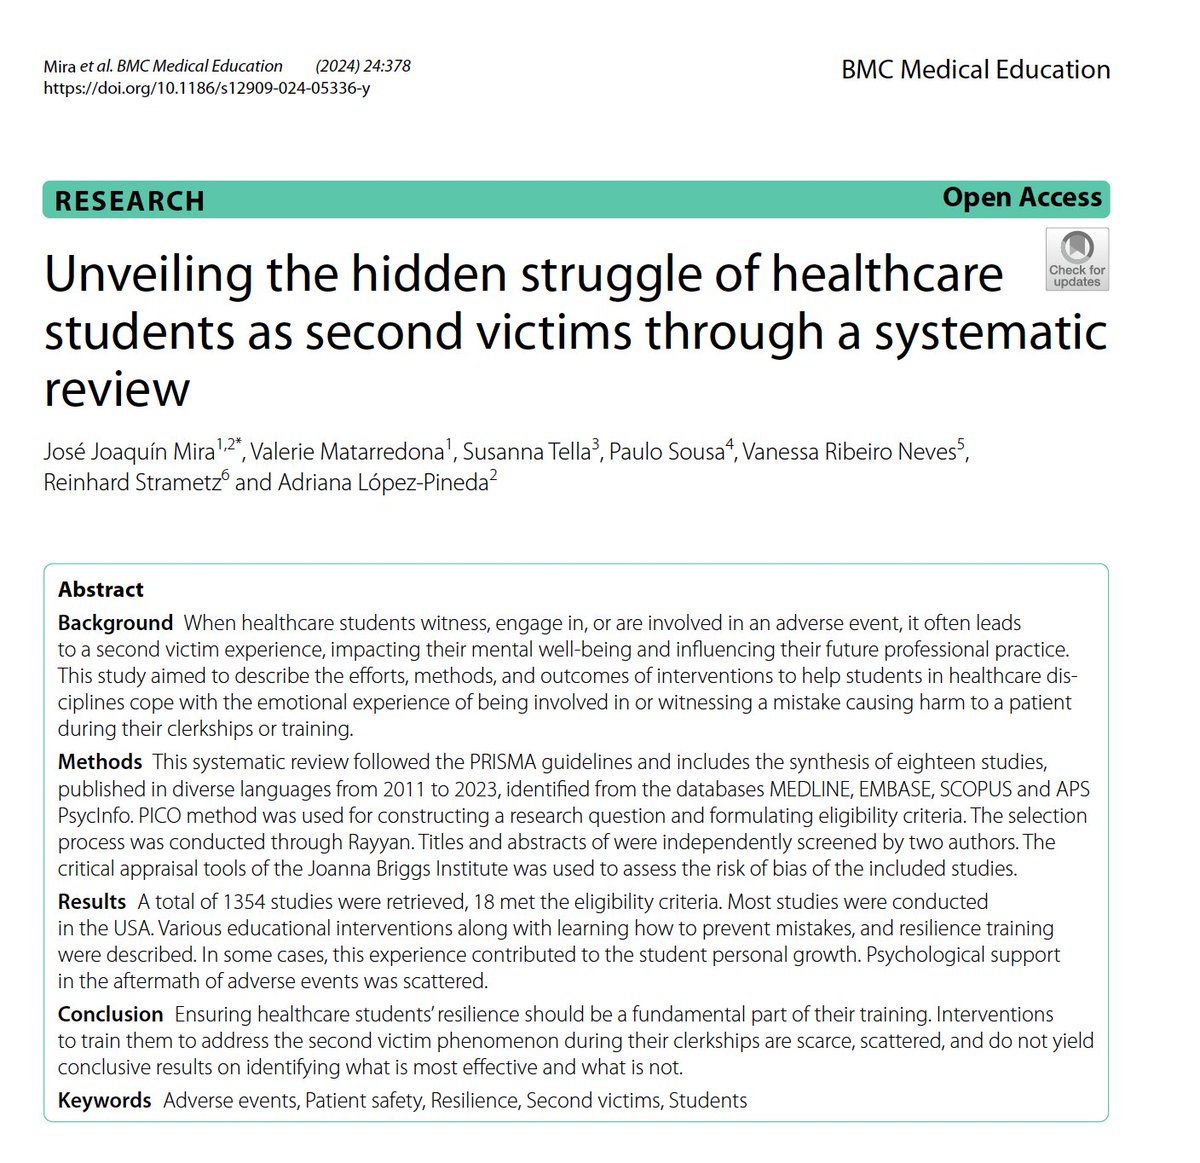 According to recent findings CA19113, few training interventions exist to support healthcare students in coping with the emotional experiences of being involved in or witnessing a mistake causing harm to a patient during their clerkships. #Healthcare #MedicalEducation